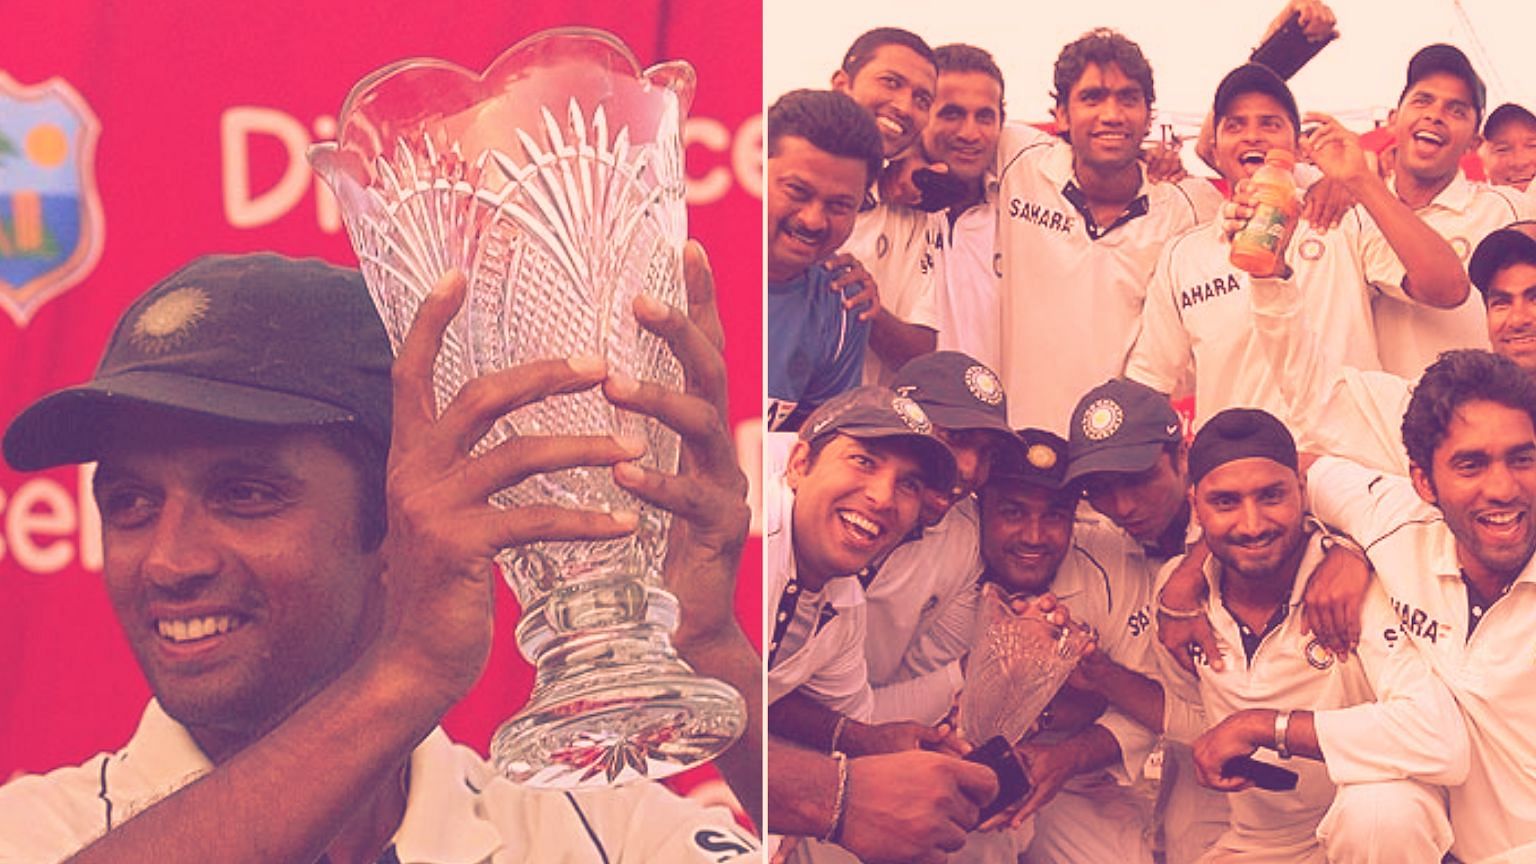 Rahul Dravid after winning a Test Series in West Indies after 35 years in 2006 (left) and the Indian team celebrating the victory